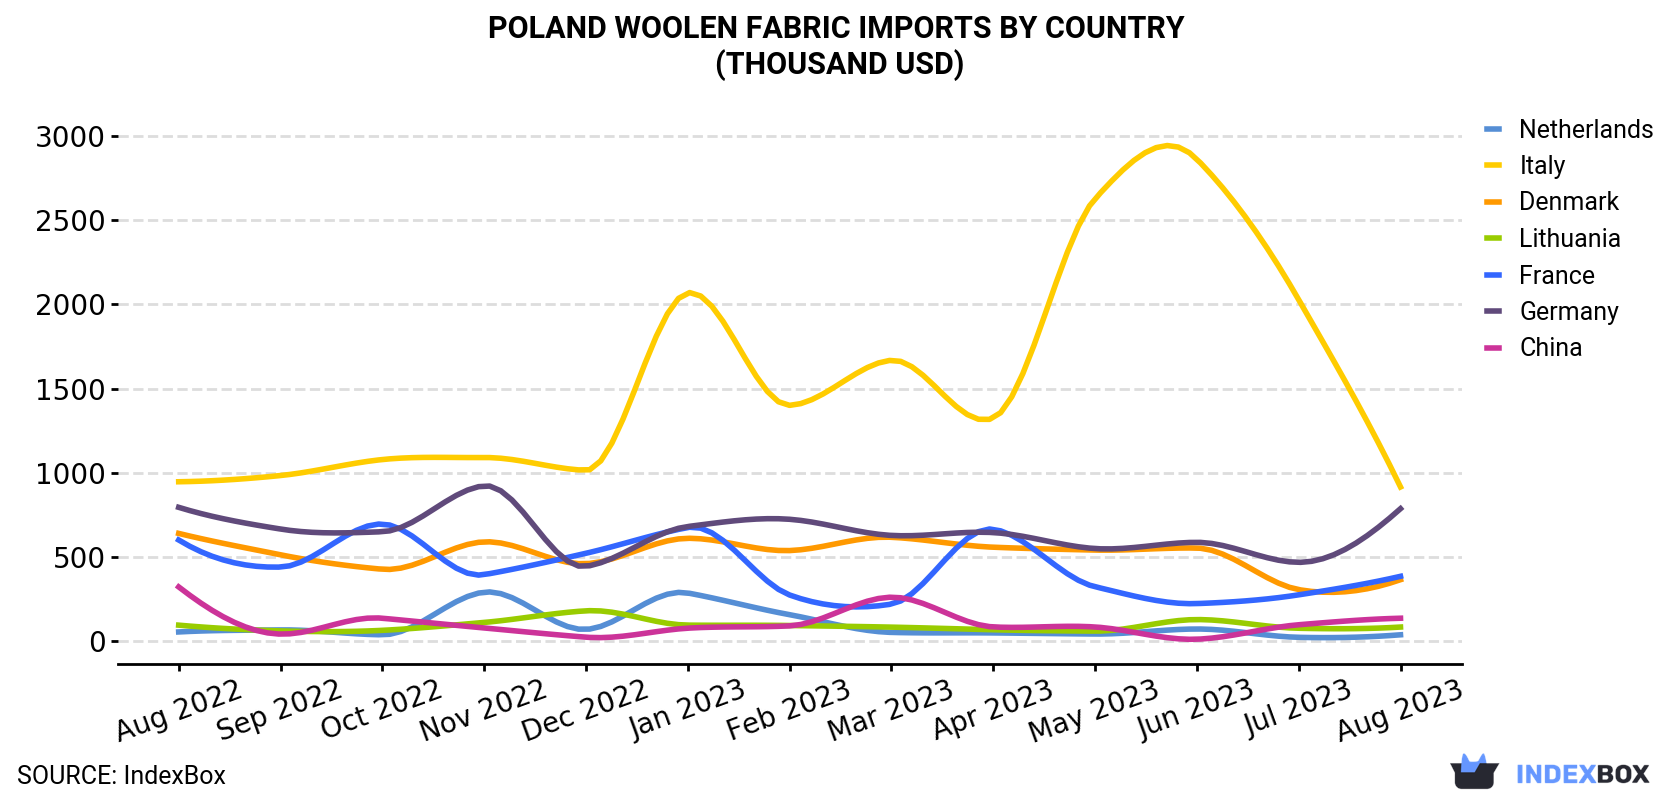 Poland Woolen Fabric Imports By Country (Thousand USD)